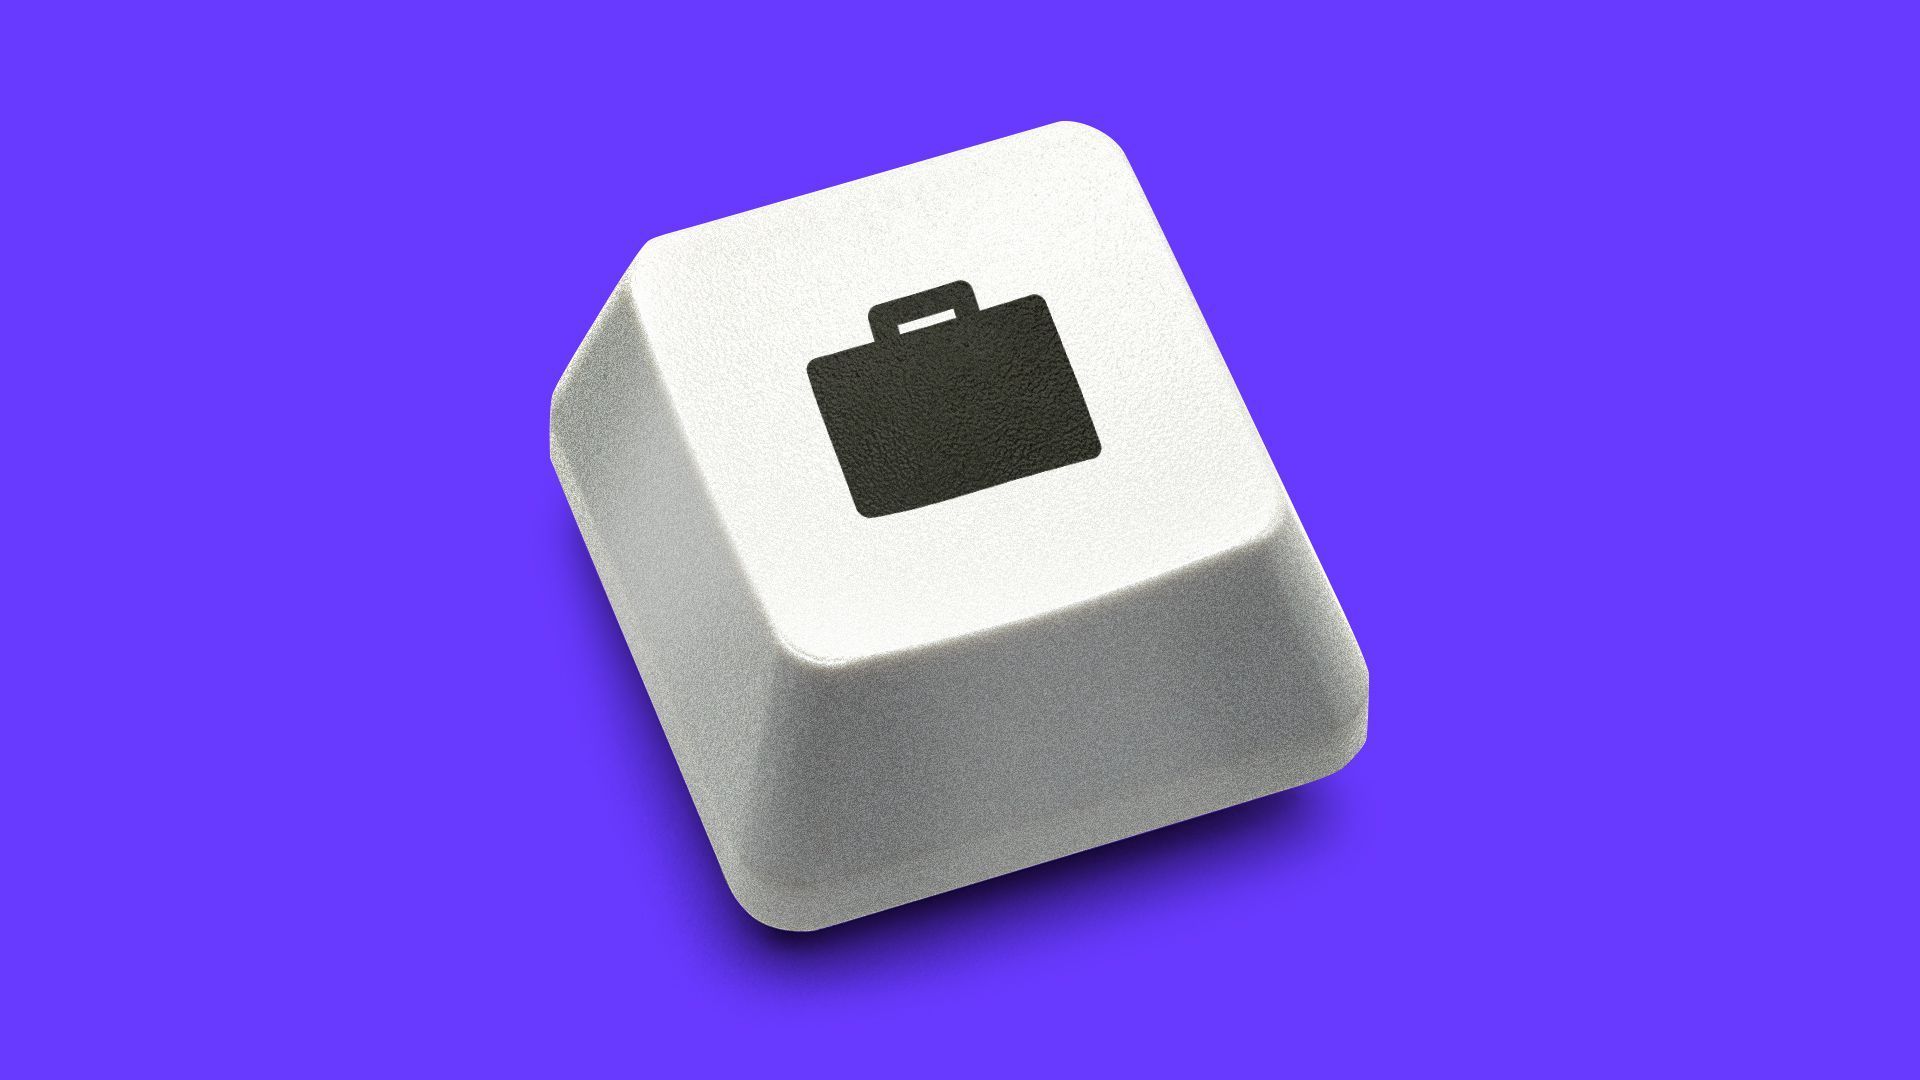 Illustration of a lone keyboard key with a briefcase icon on it. 